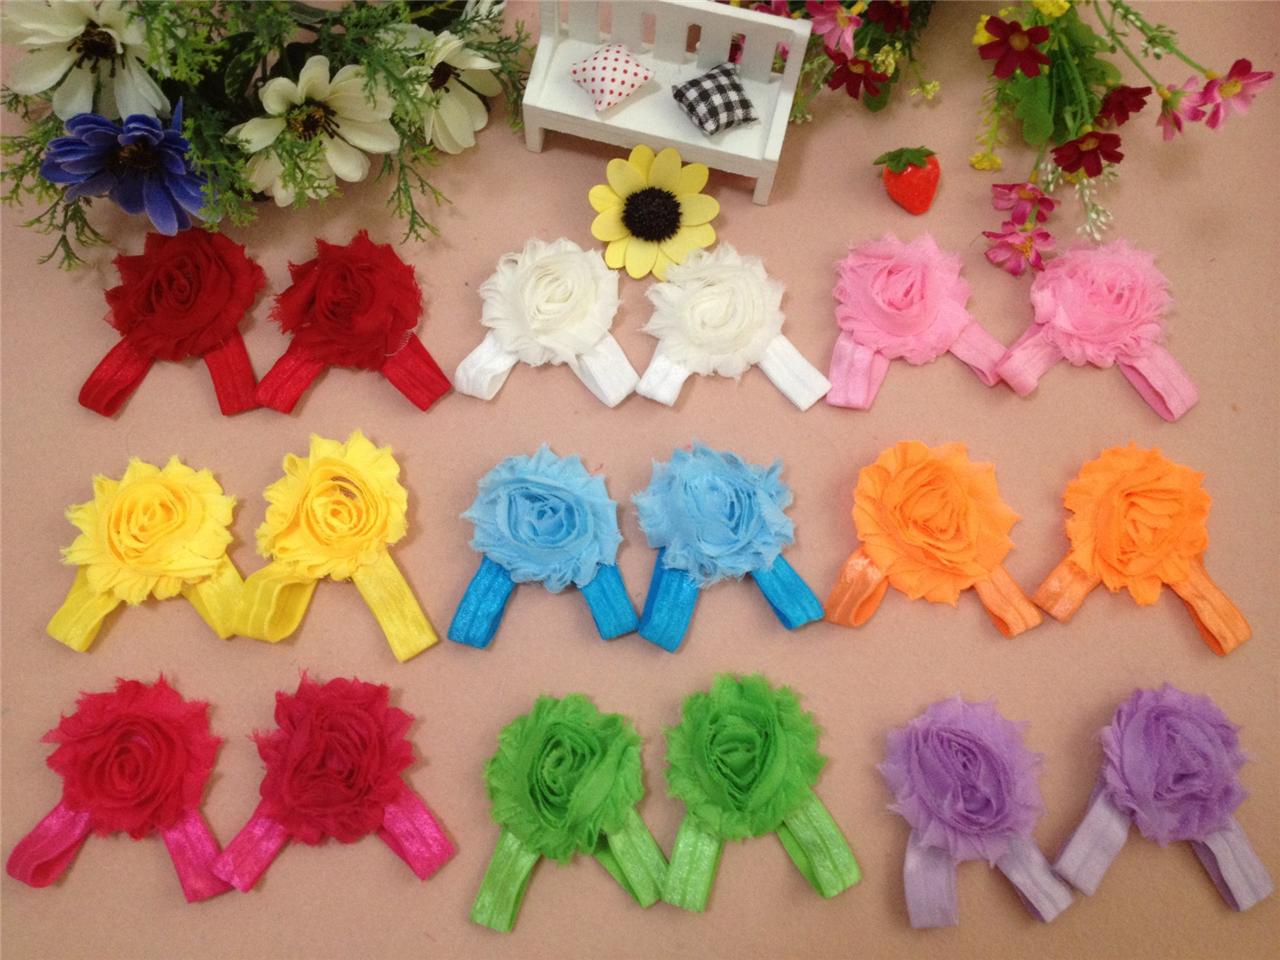 ... Baby chiffon shabby rose flower headbands+Bare foot ring Sandals Shoes